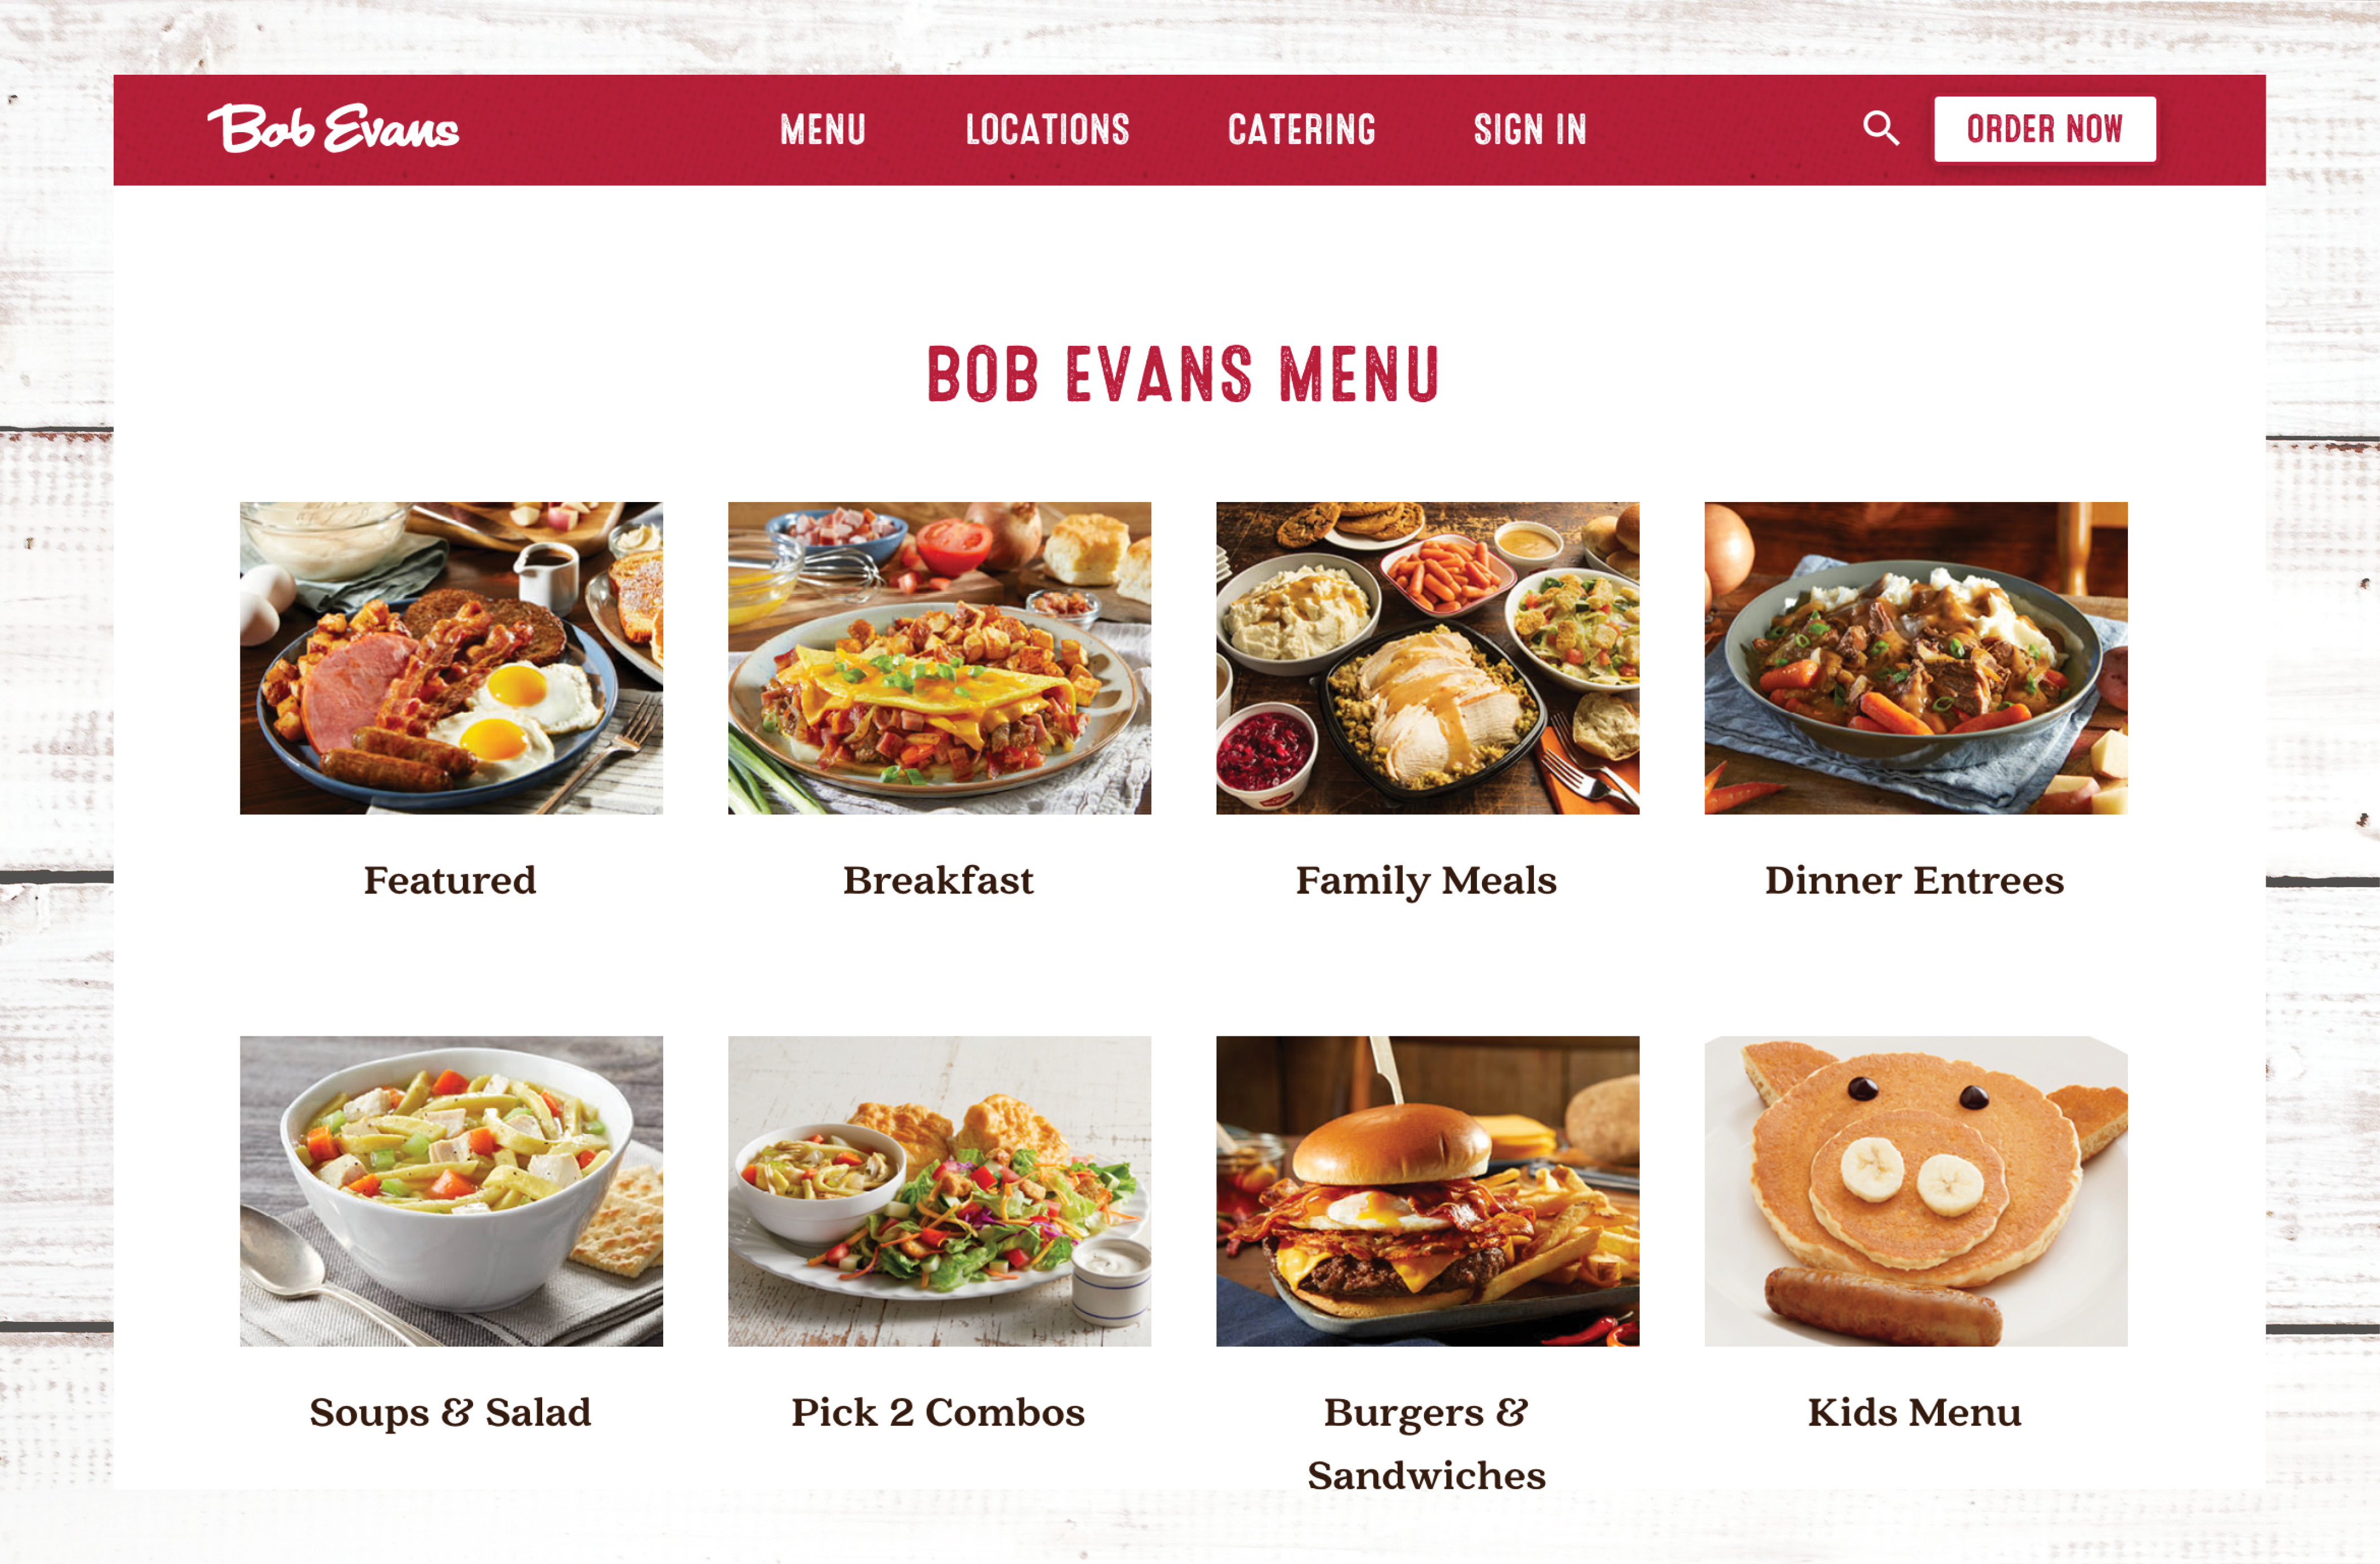 Bob Evans How To Order Curbside Pickup, Takeout Or Delivery From Bob